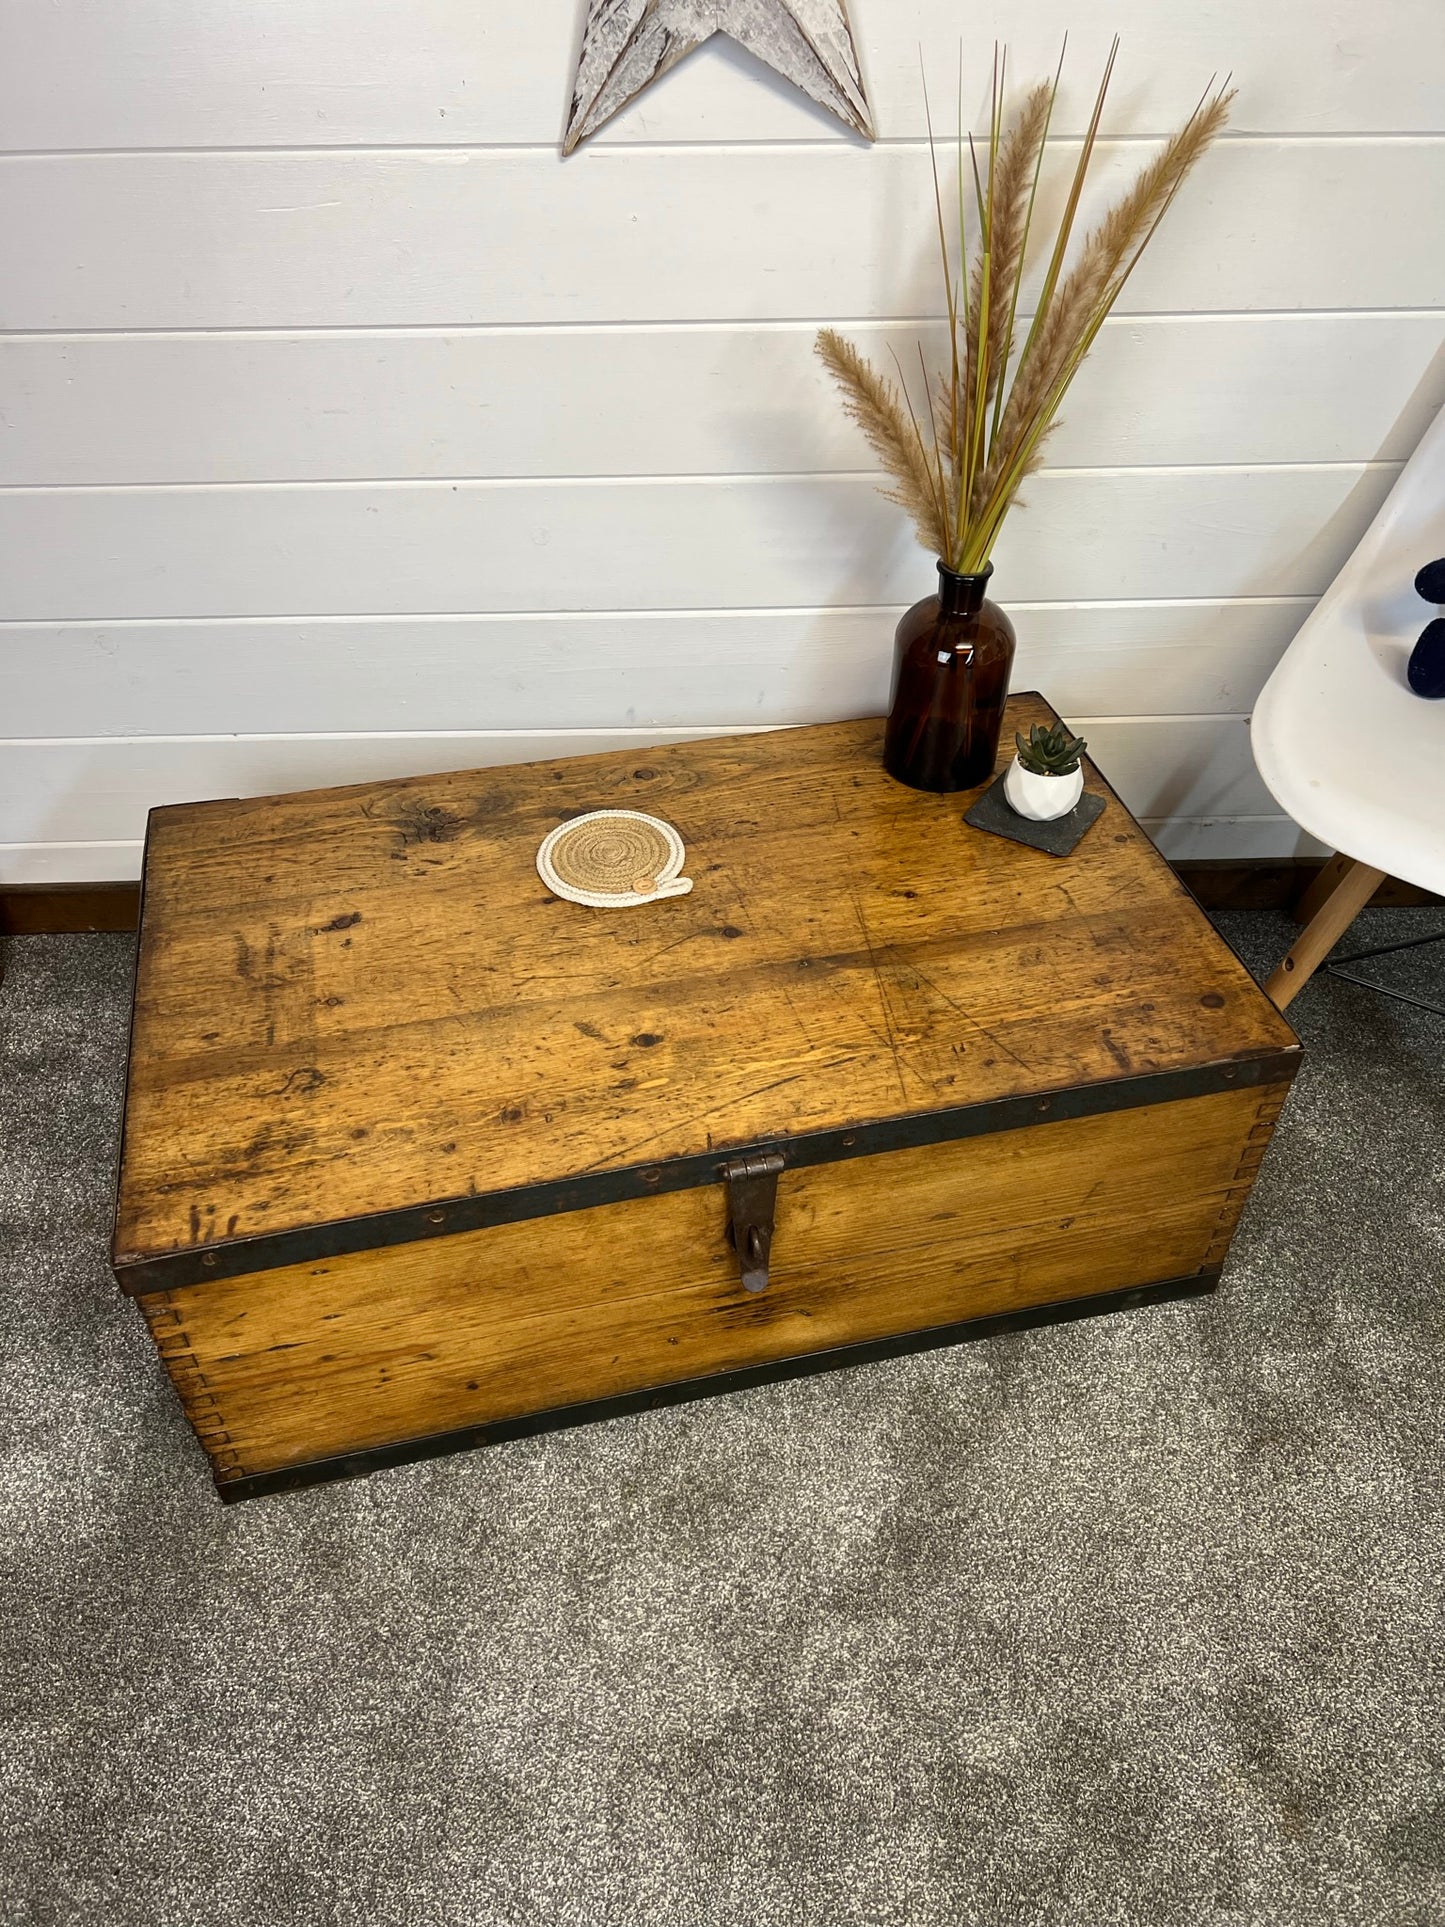 Rustic Industrial Wooden Chest Vintage Trunk Rustic Farmhouse Home Coffee Table Blanket Storage Box